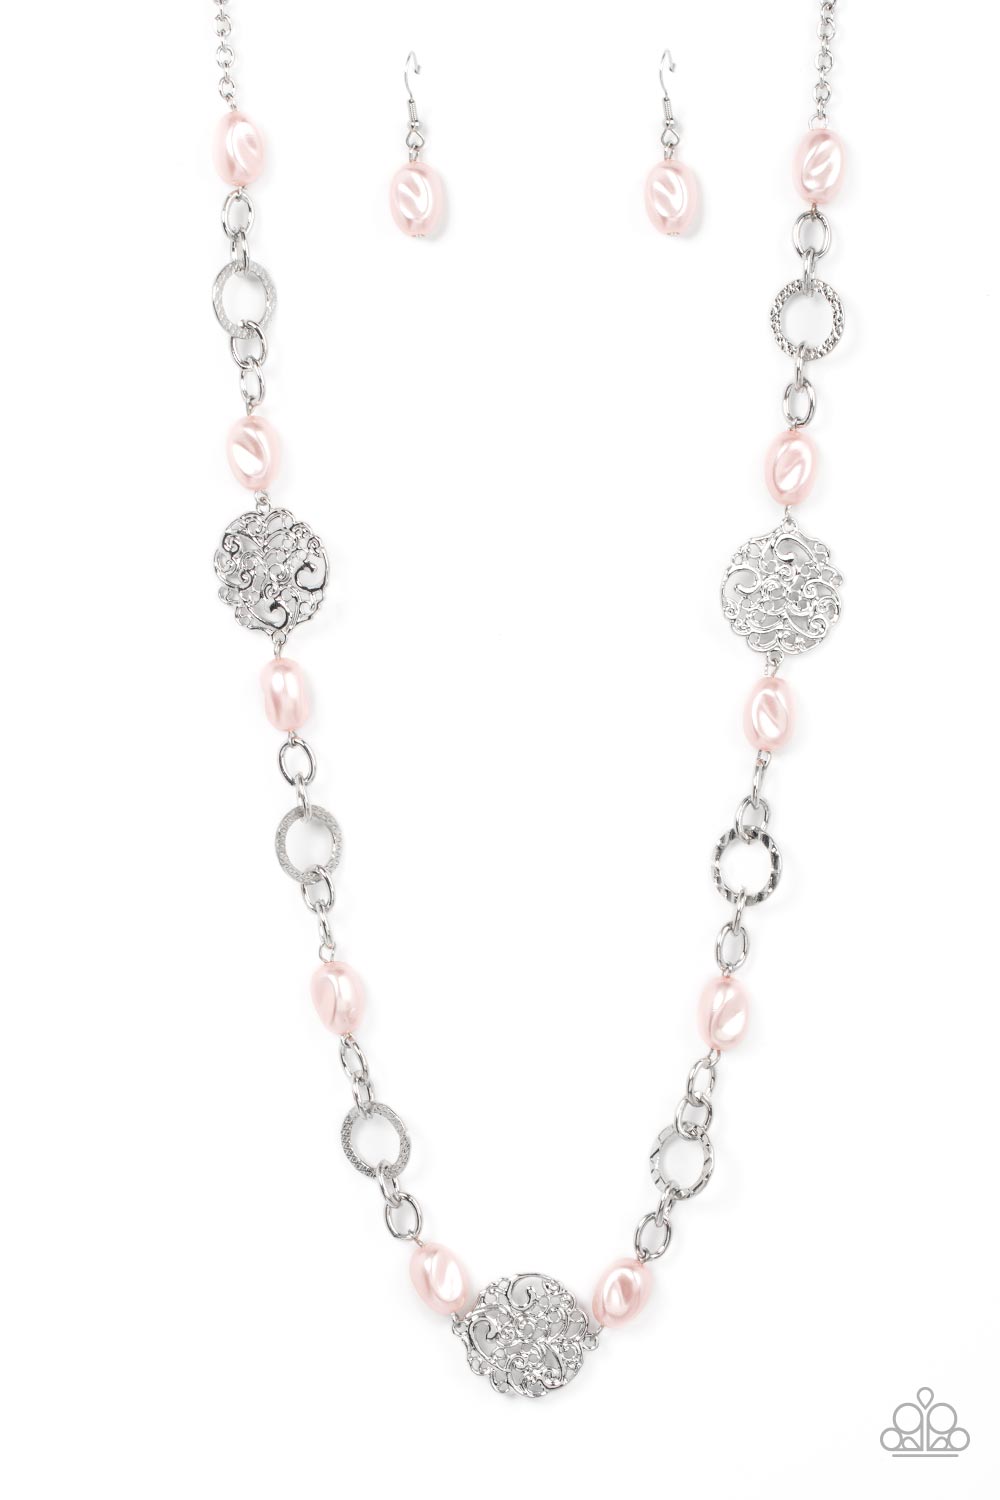 Social Soiree - Pink Pearl - Silver Necklace - Paparazzi  Accessories - Pebble-like pink pearls, textured silver links, and vine-like silver frames delicately connect into a whimsical compilation across the chest. Features an adjustable clasp closure. Sold as one individual necklace. Includes one pair of matching earrings.